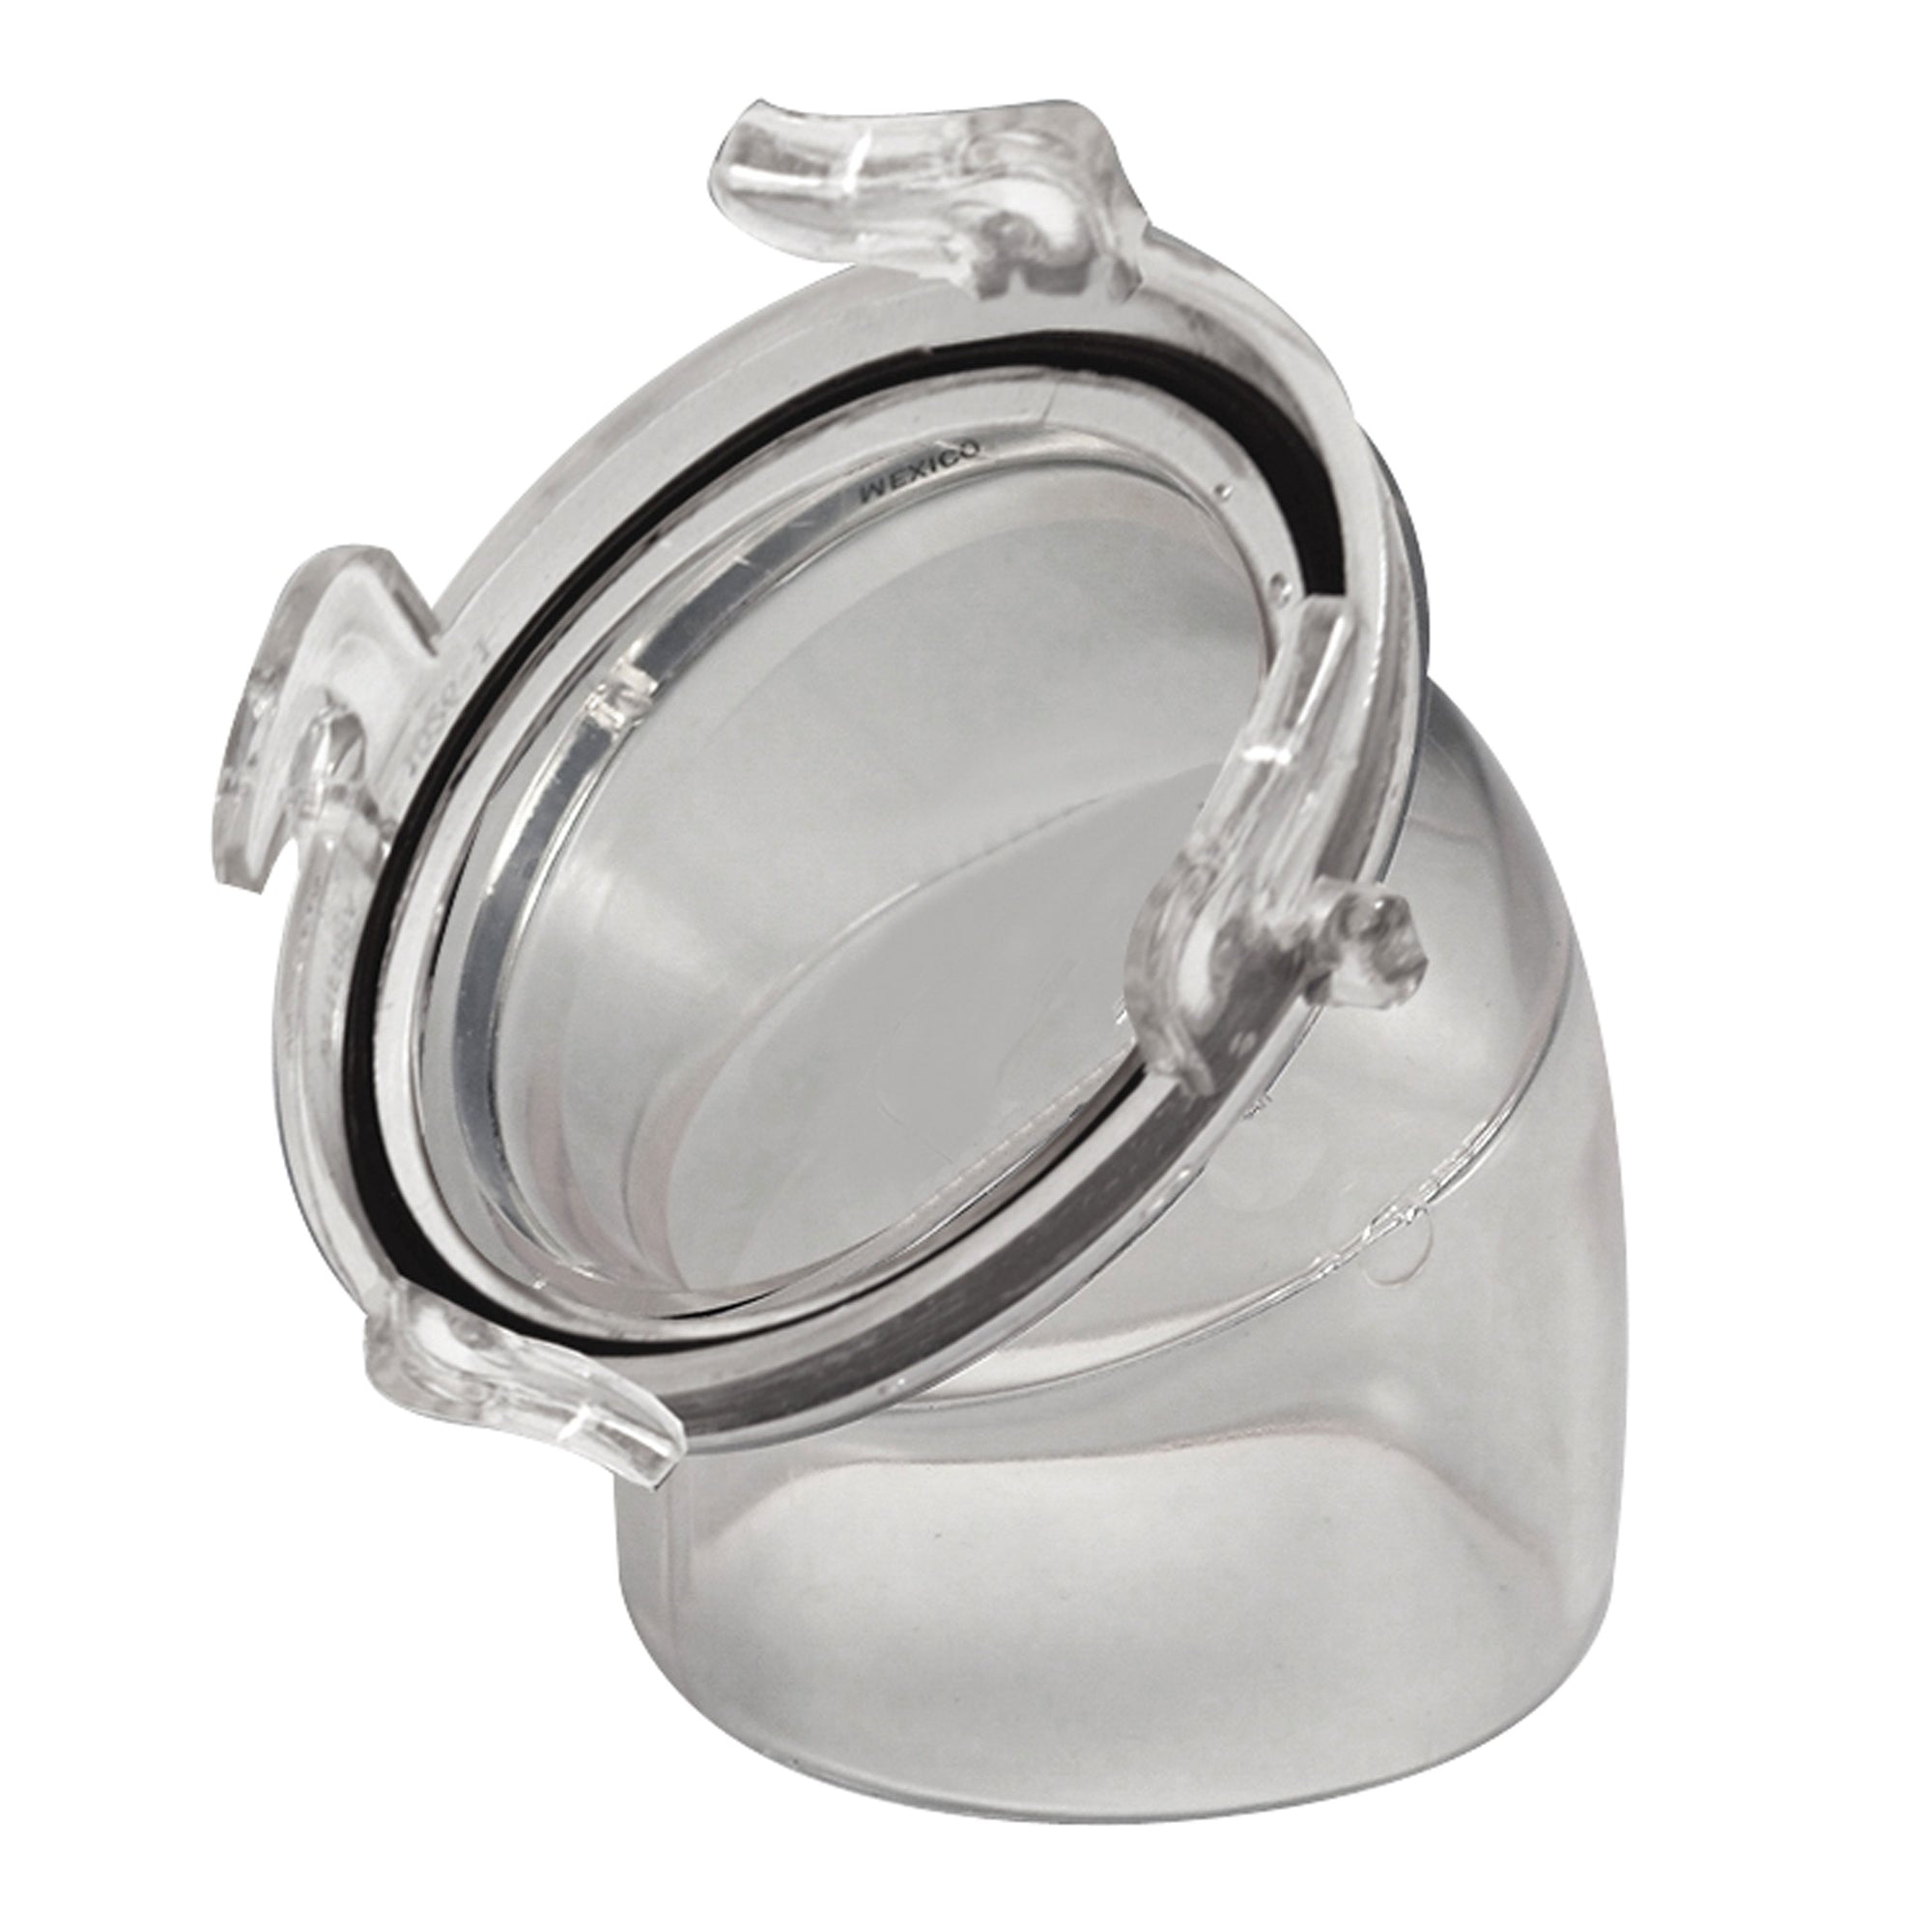 Valterra T1026 Hose Adapter - 45°, 3", ClearView